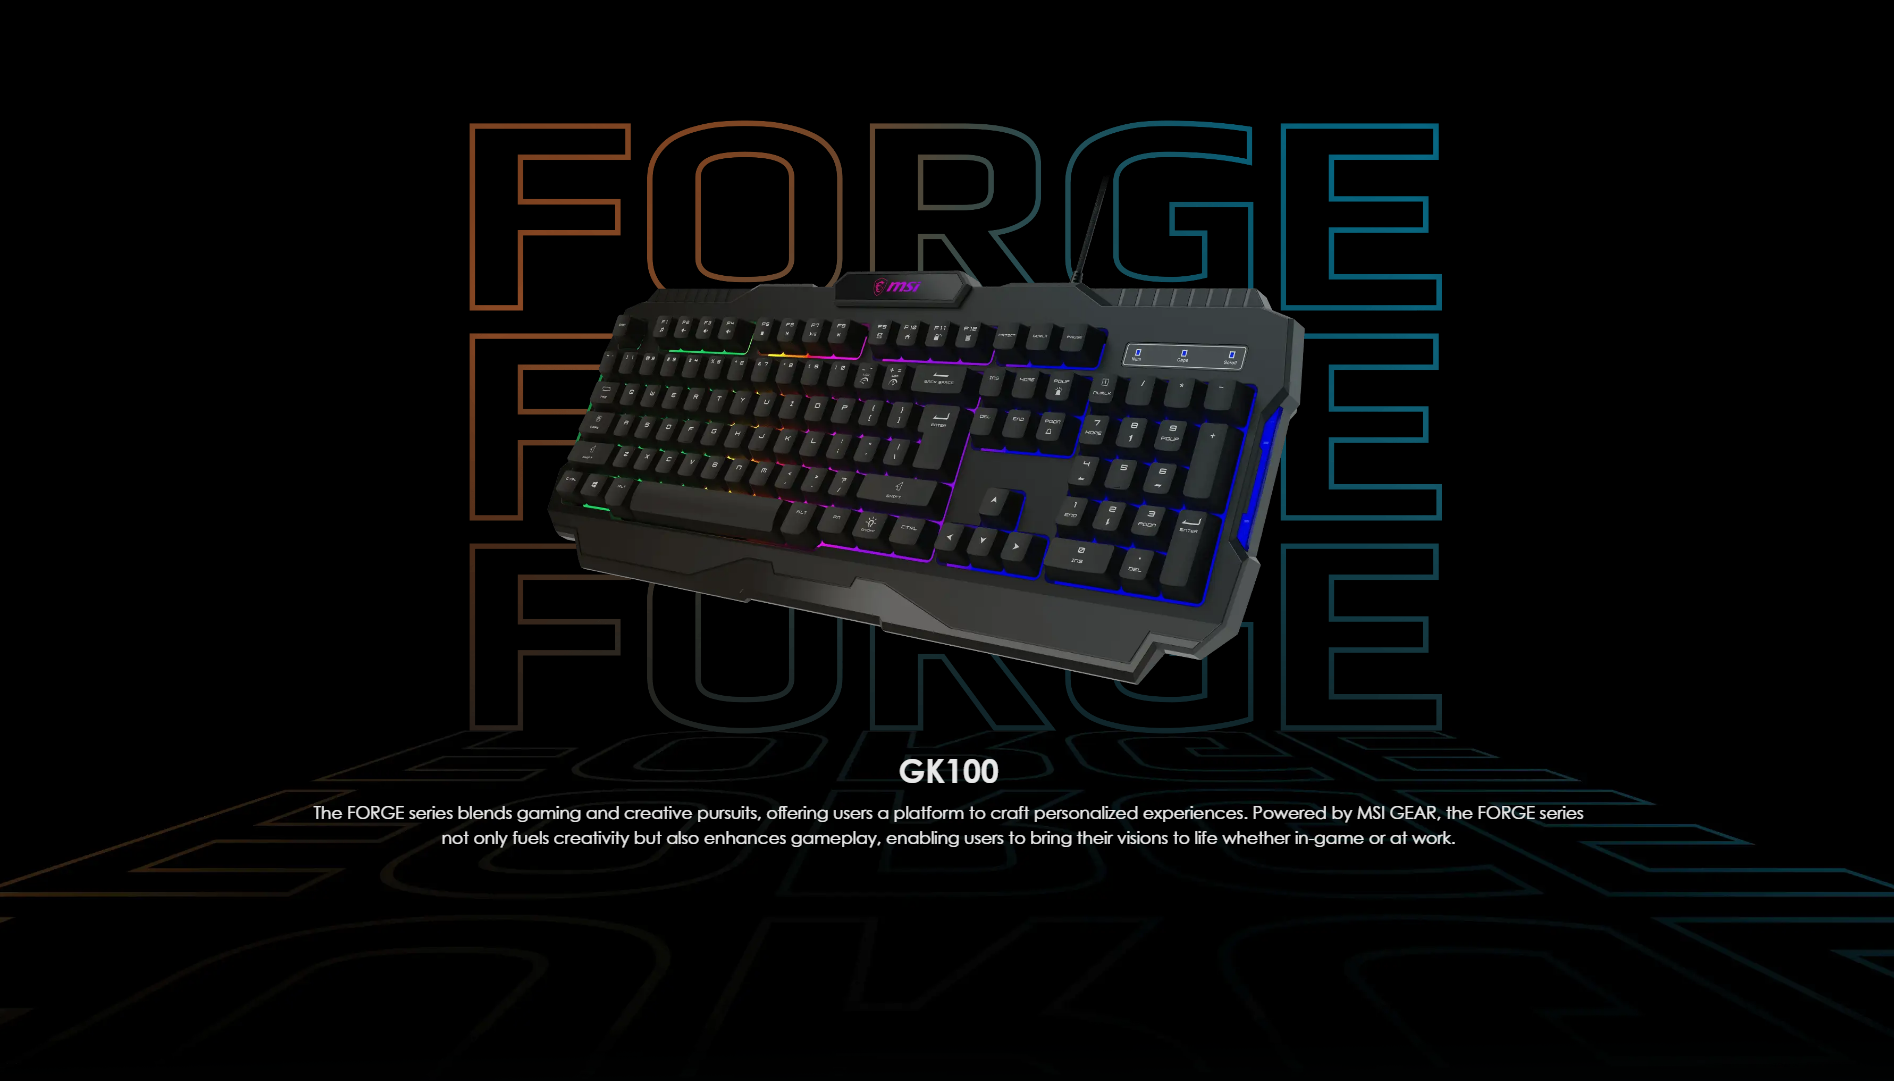 A large marketing image providing additional information about the product MSI Forge GK100 RGB Gaming Keyboard - Additional alt info not provided